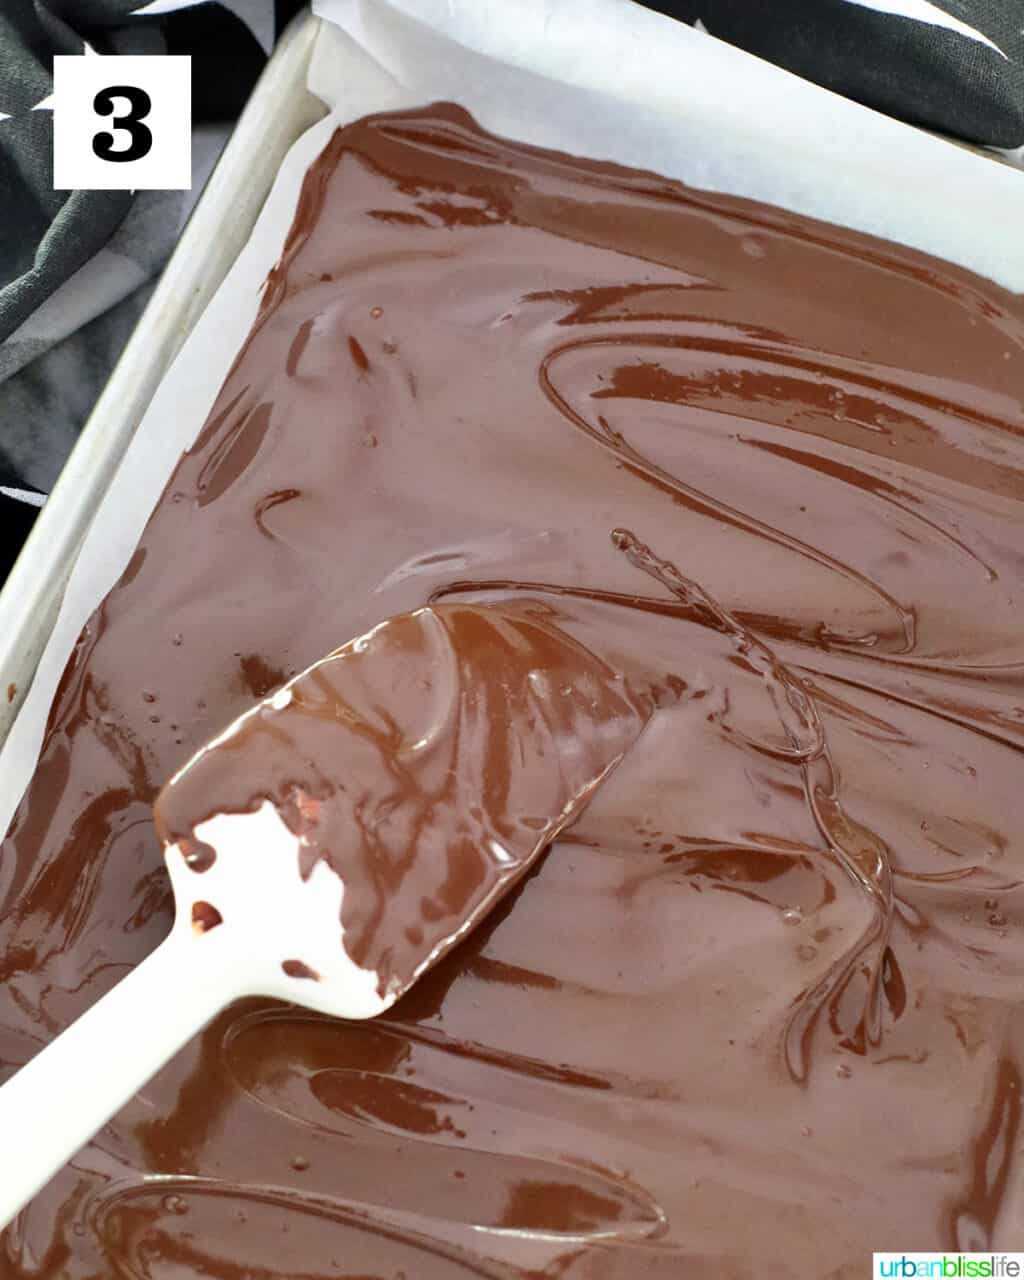 spreading melted chocolate in sheetpan